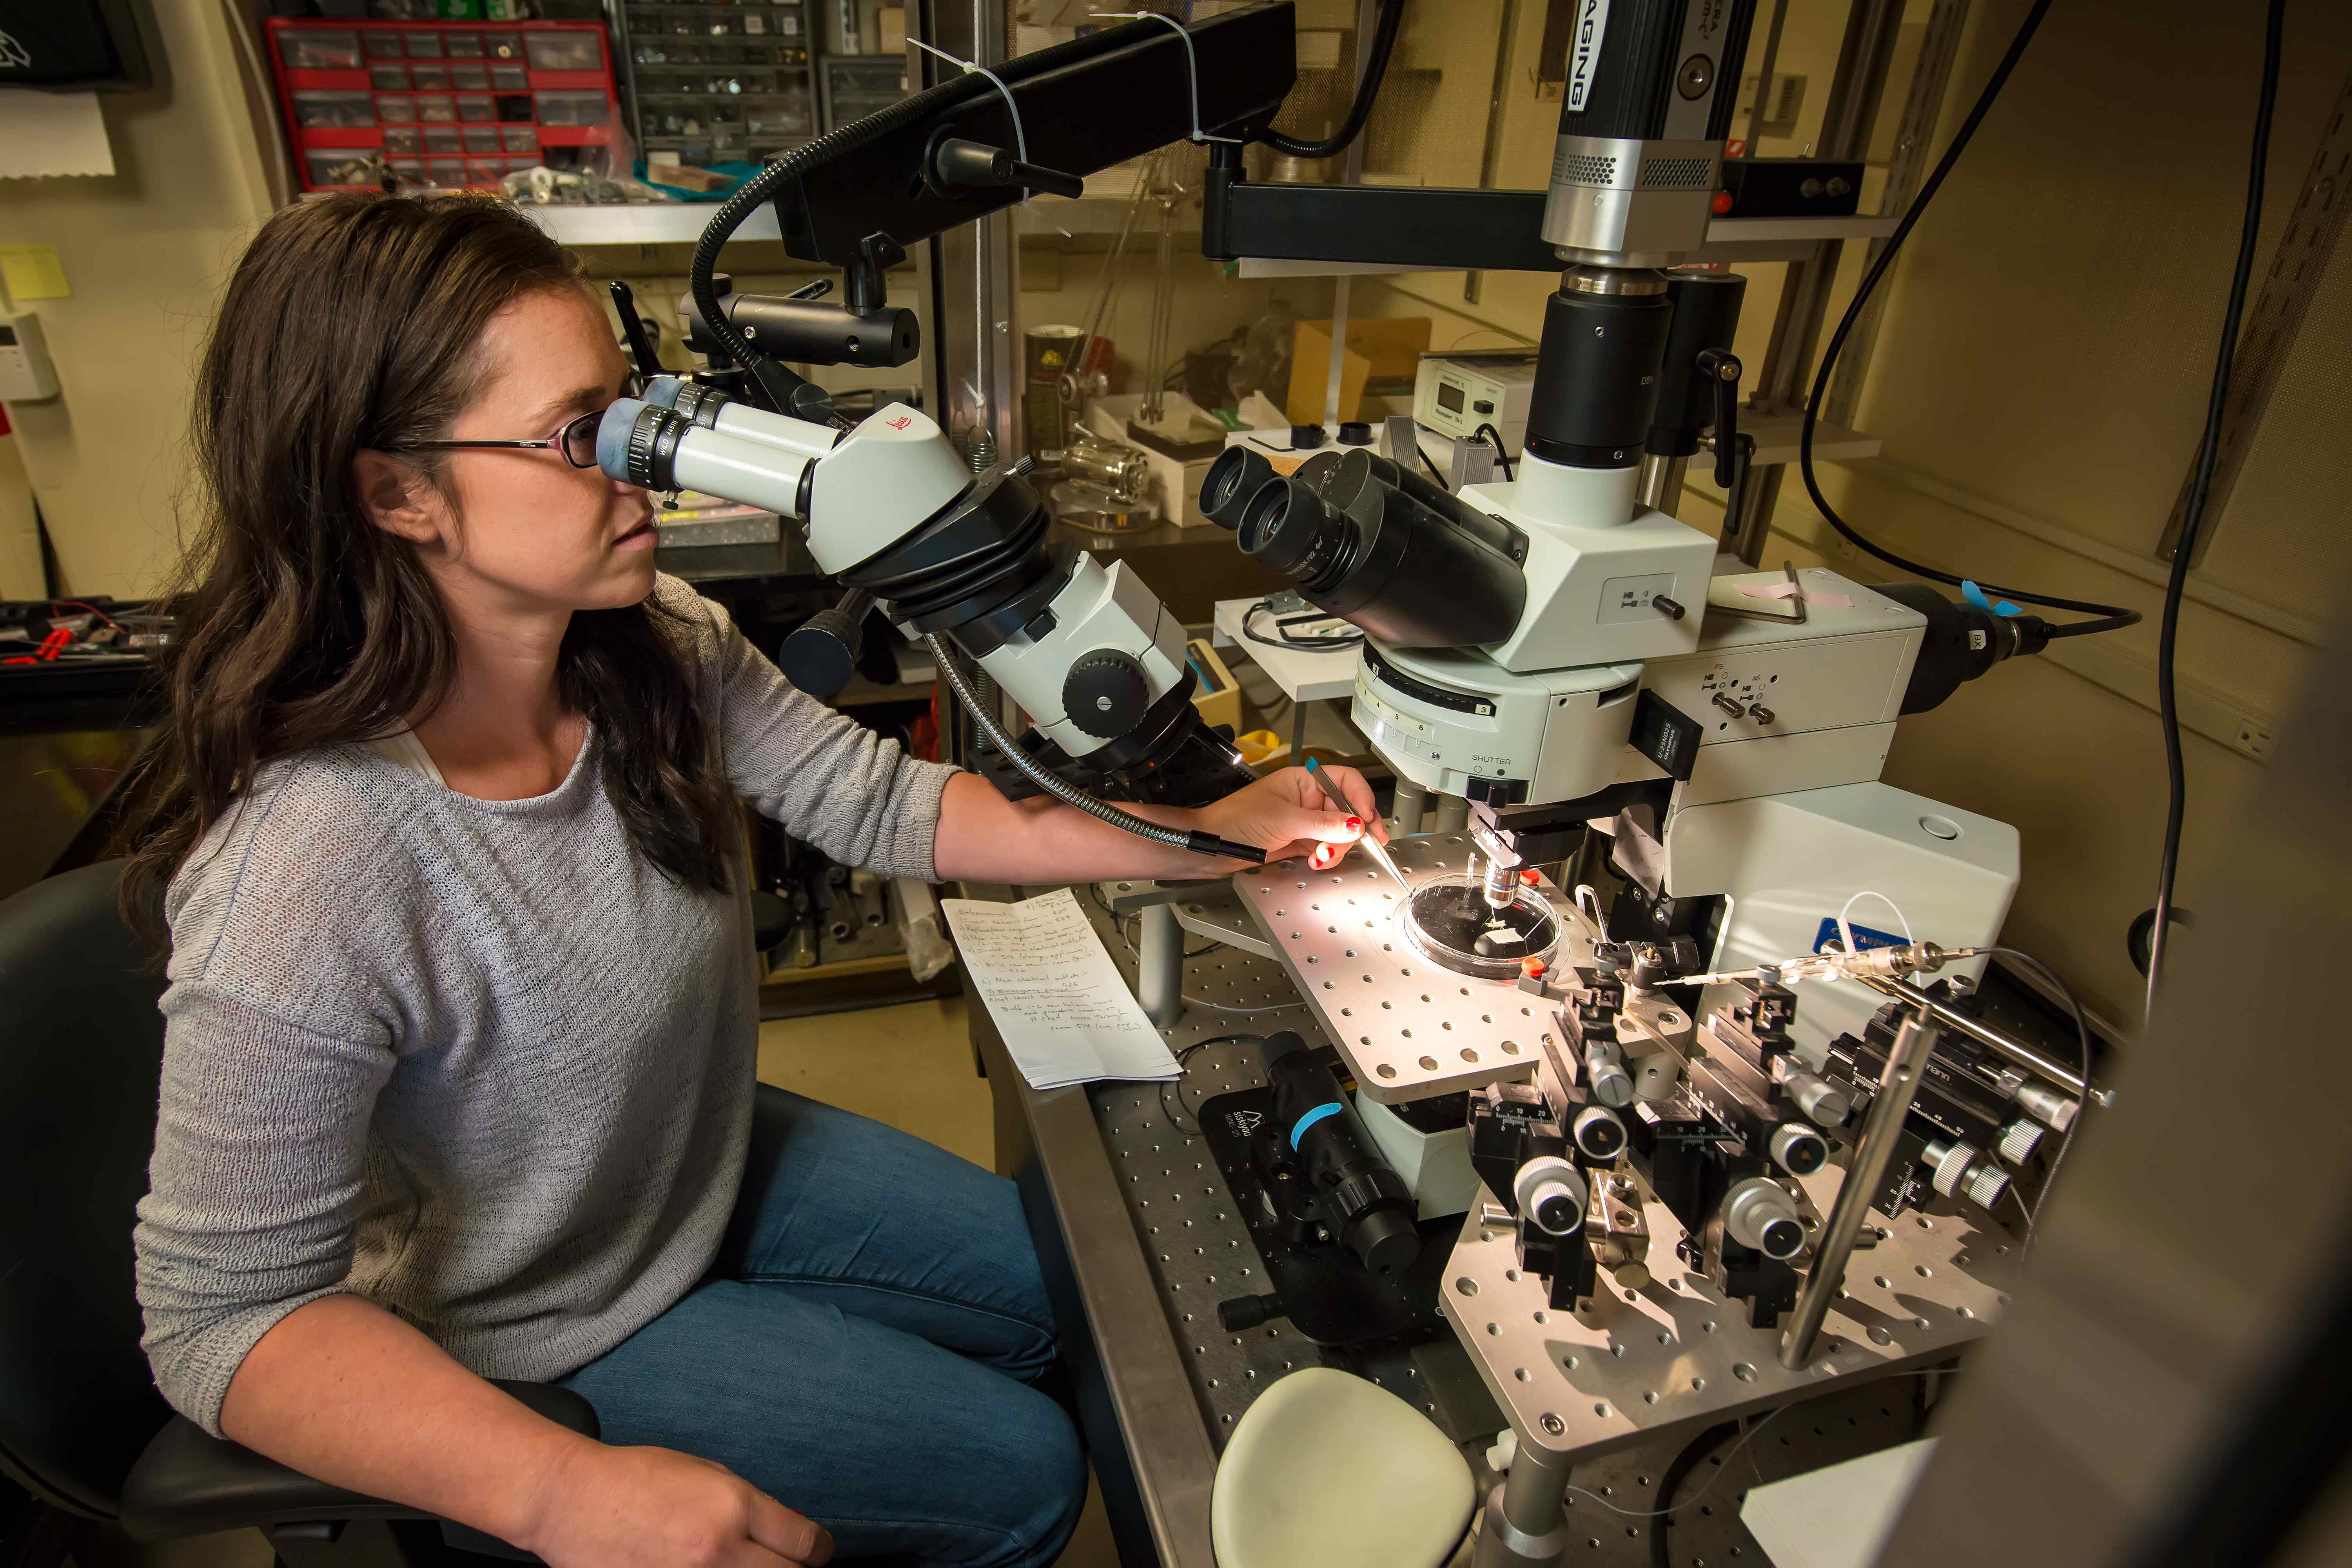 Researcher looks into large microscope